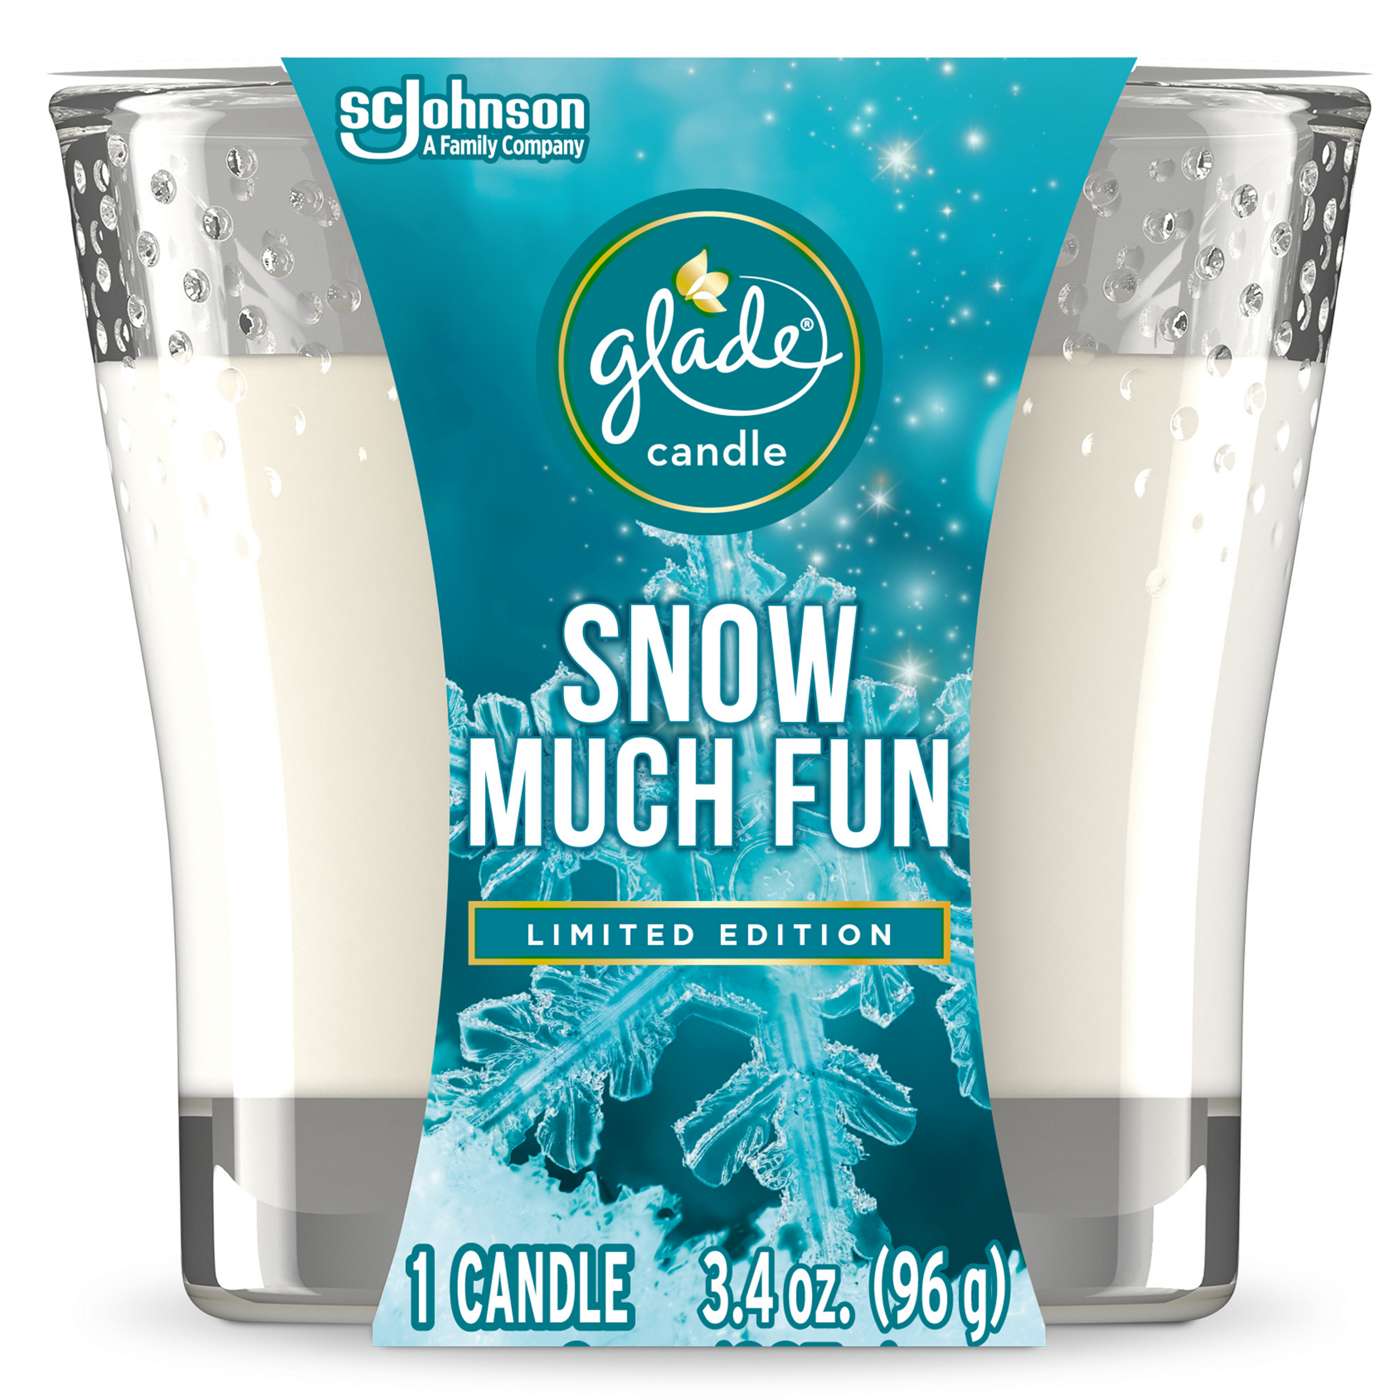 Glade Snow Much Fun Holiday Candle; image 1 of 3